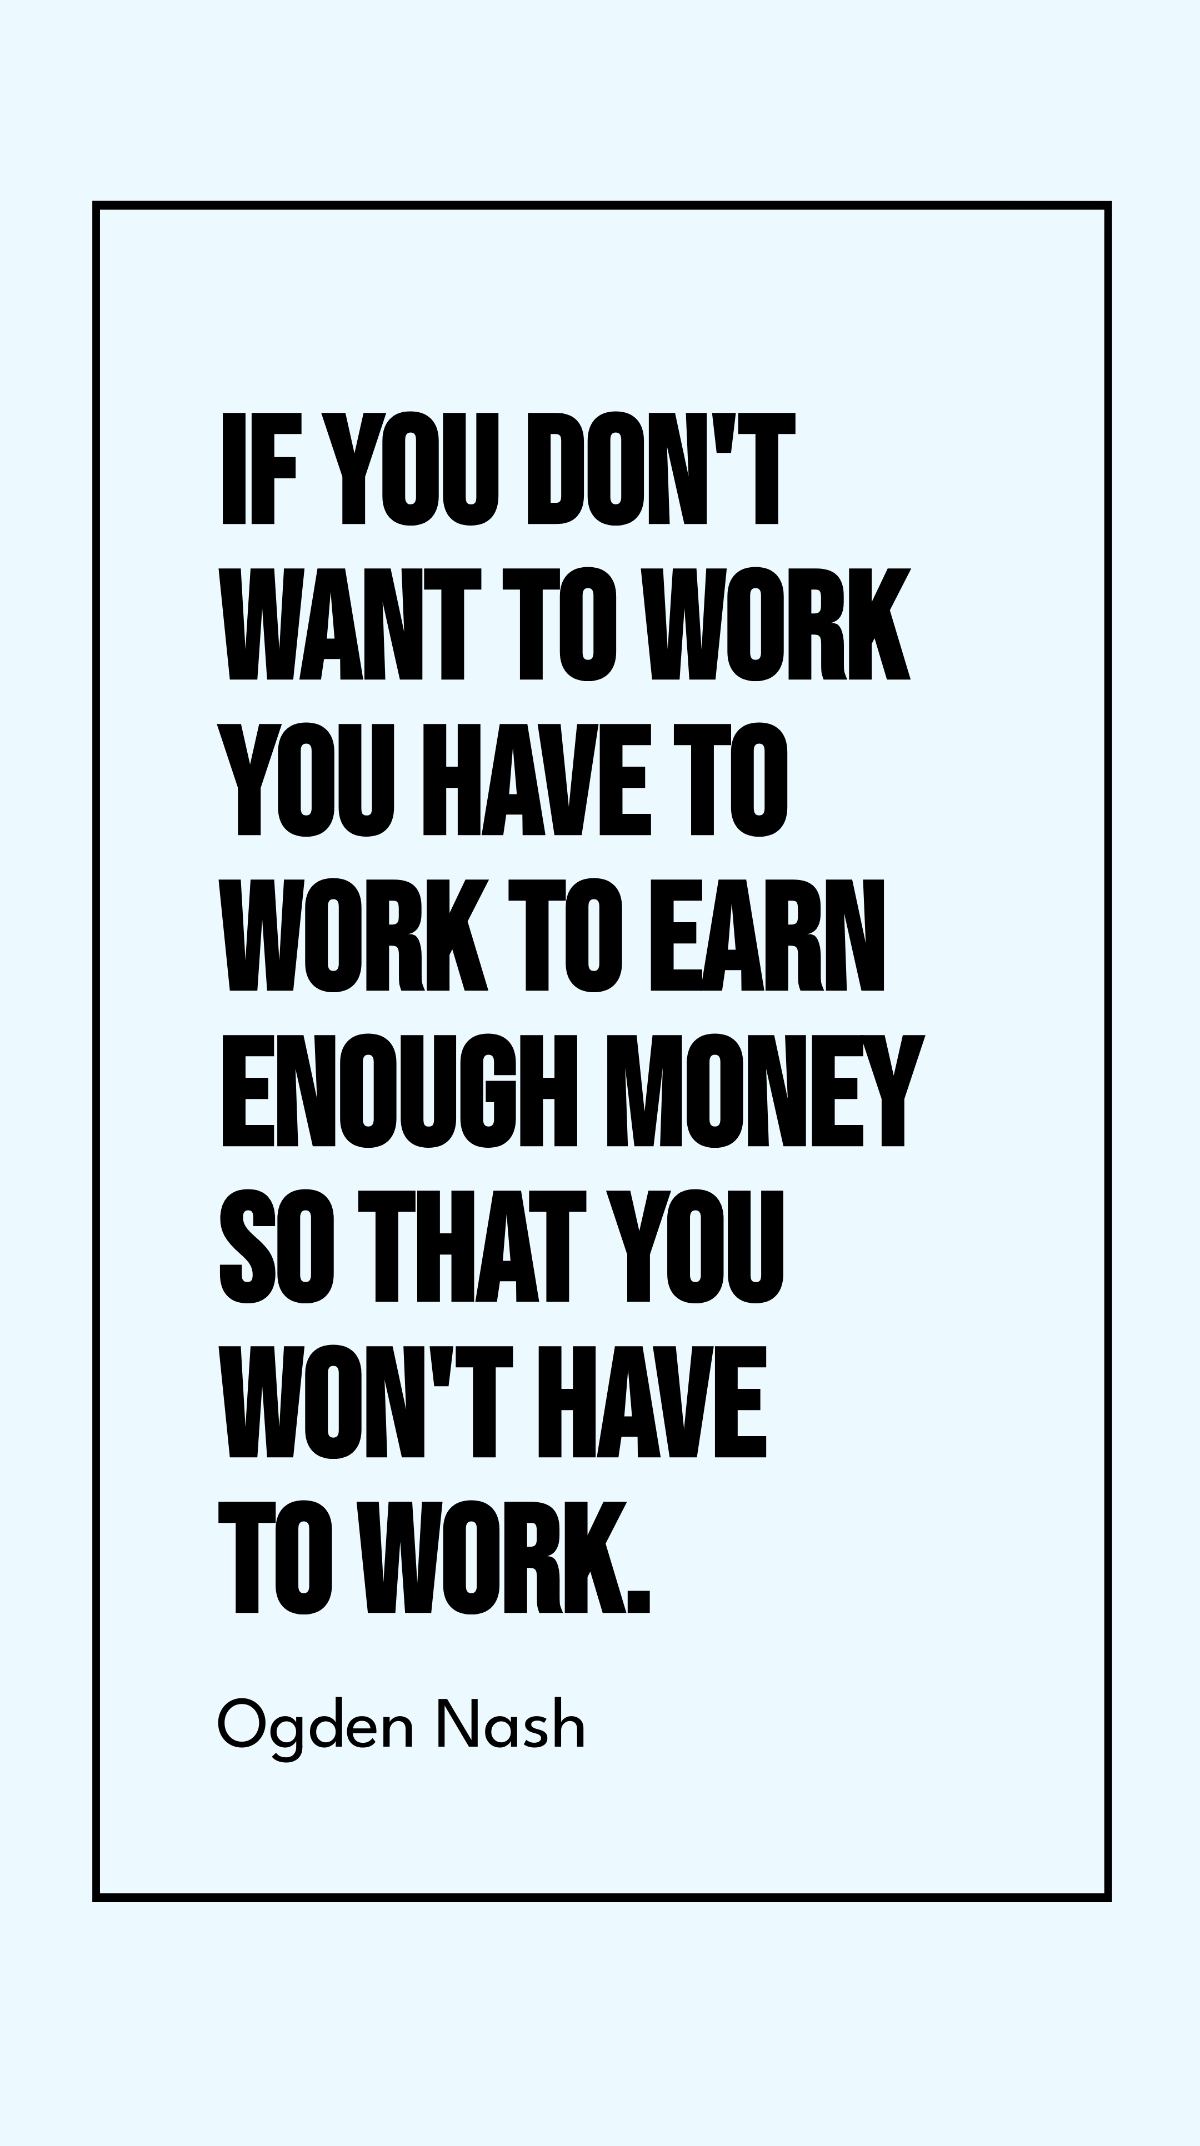 Ogden Nash - If you don't want to work you have to work to earn enough money so that you won't have to work. Template